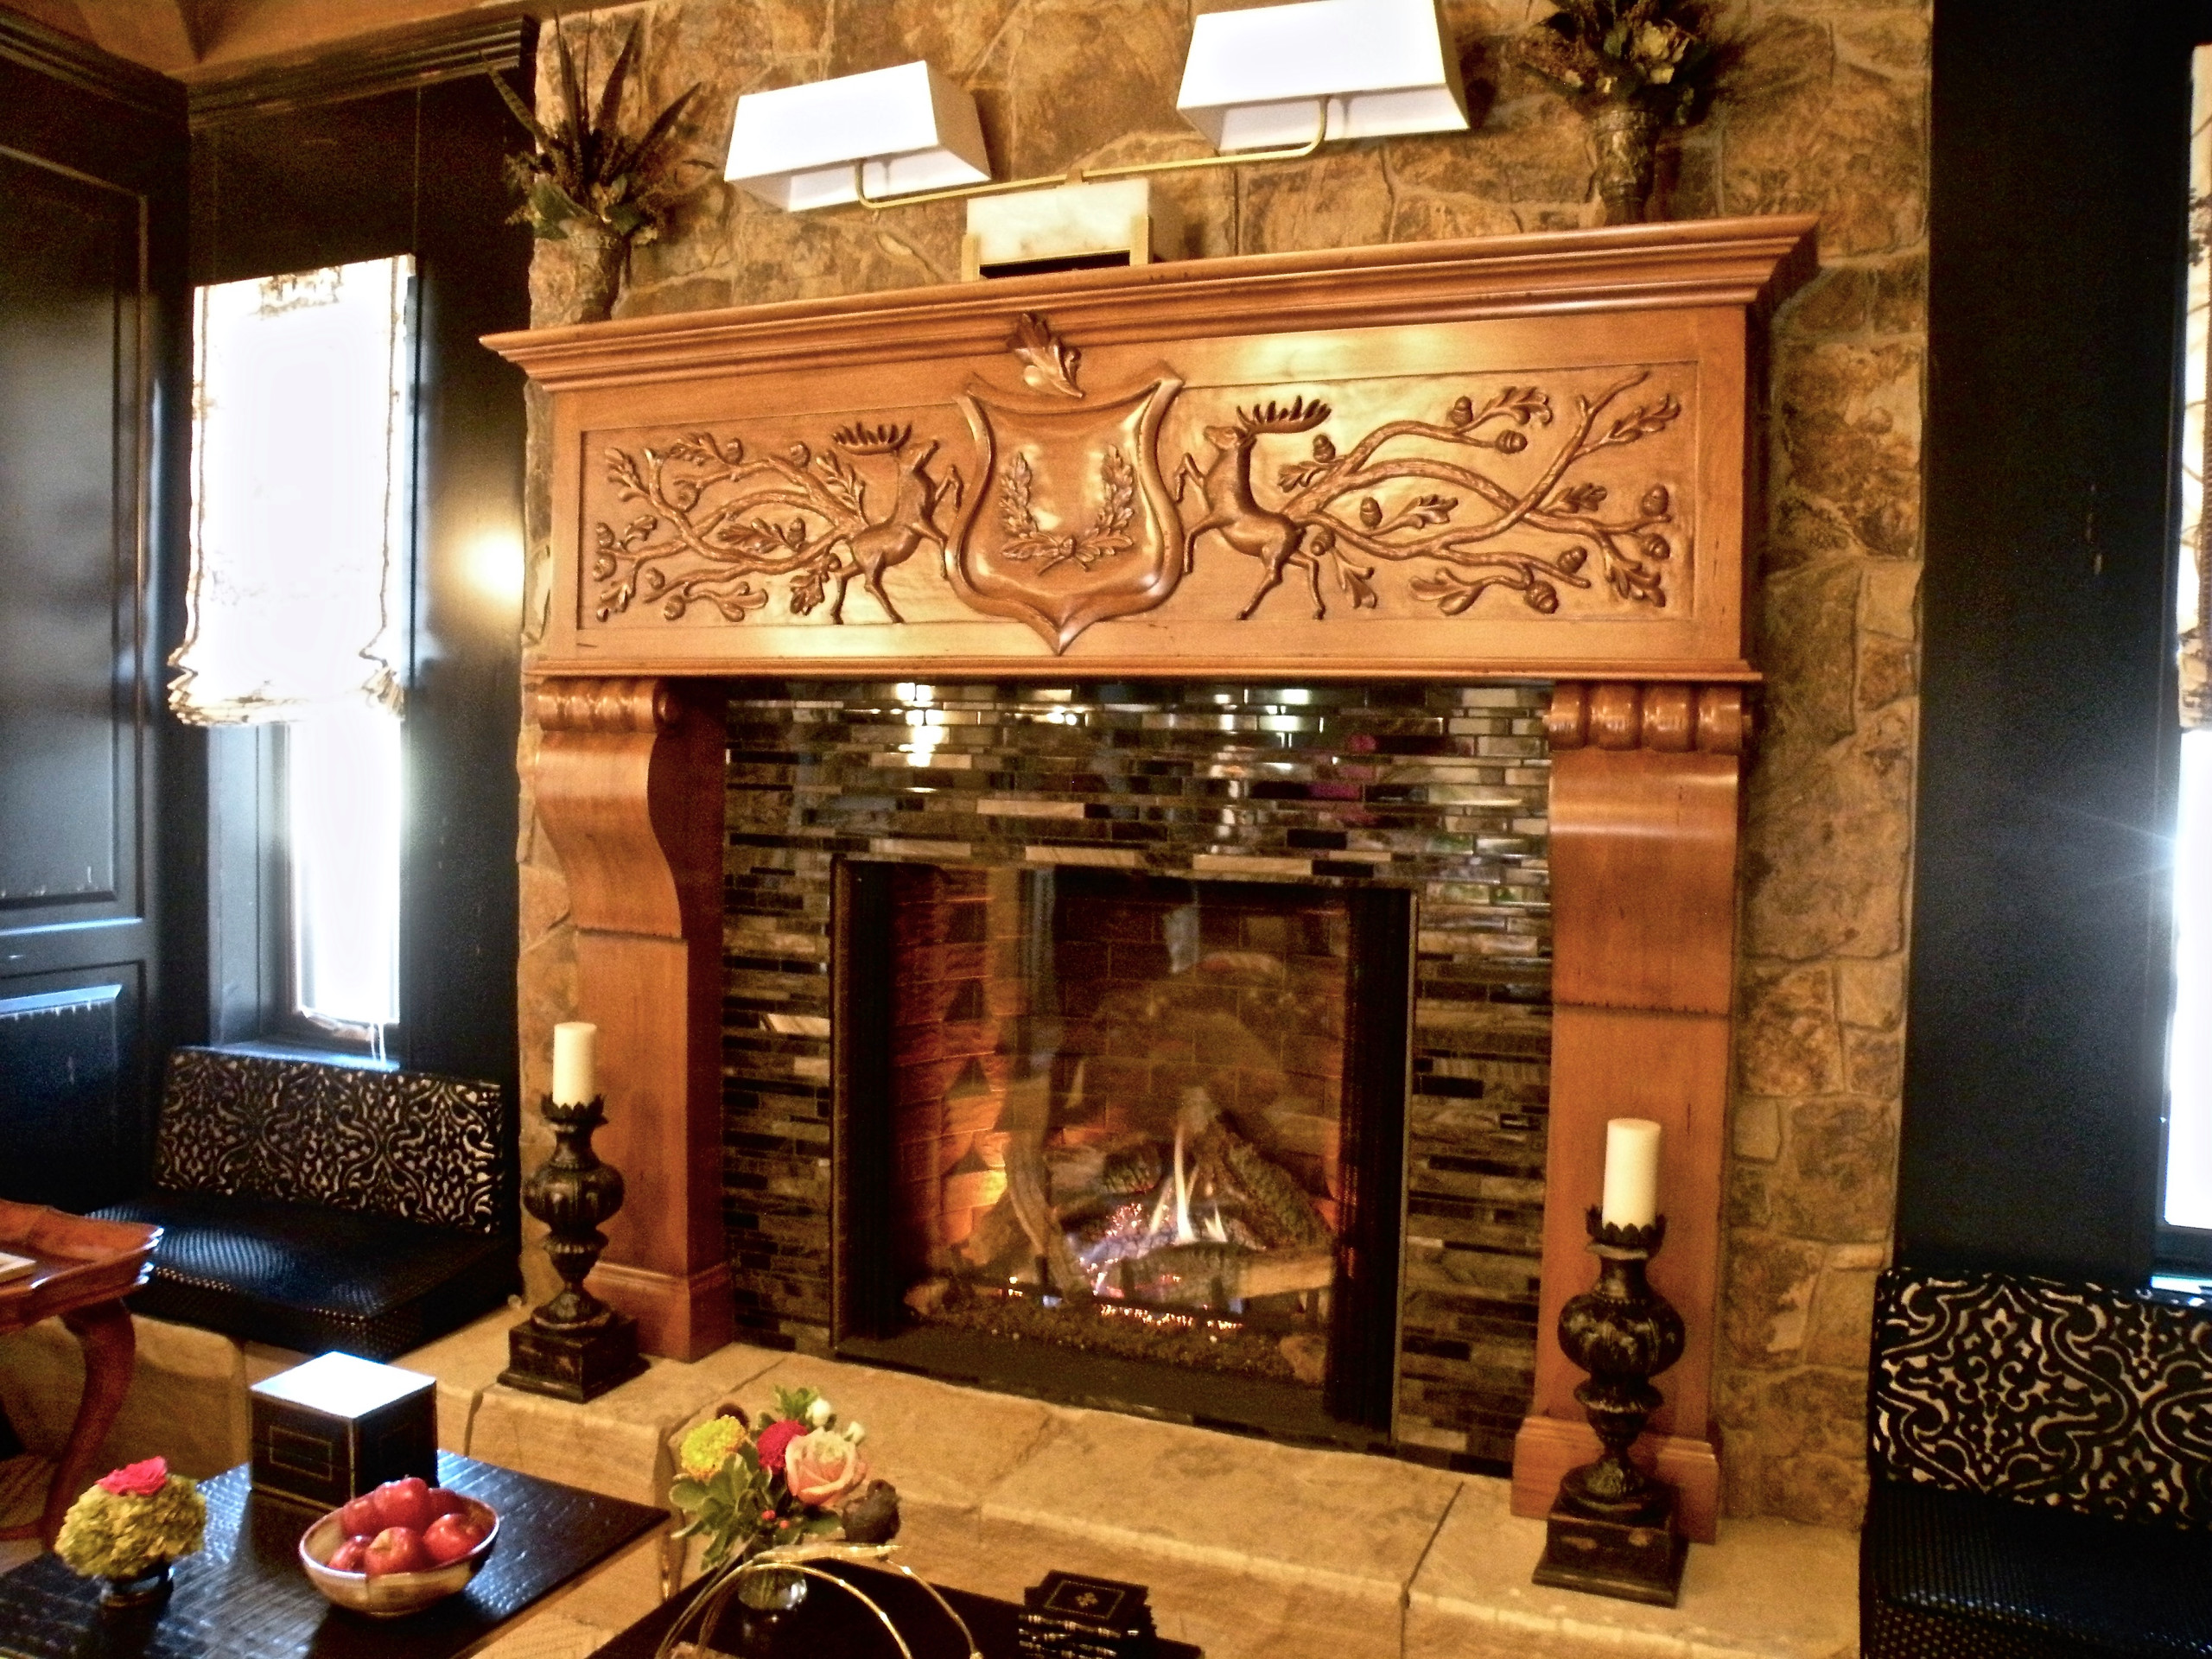 Fireplace Mantles/Surrounds